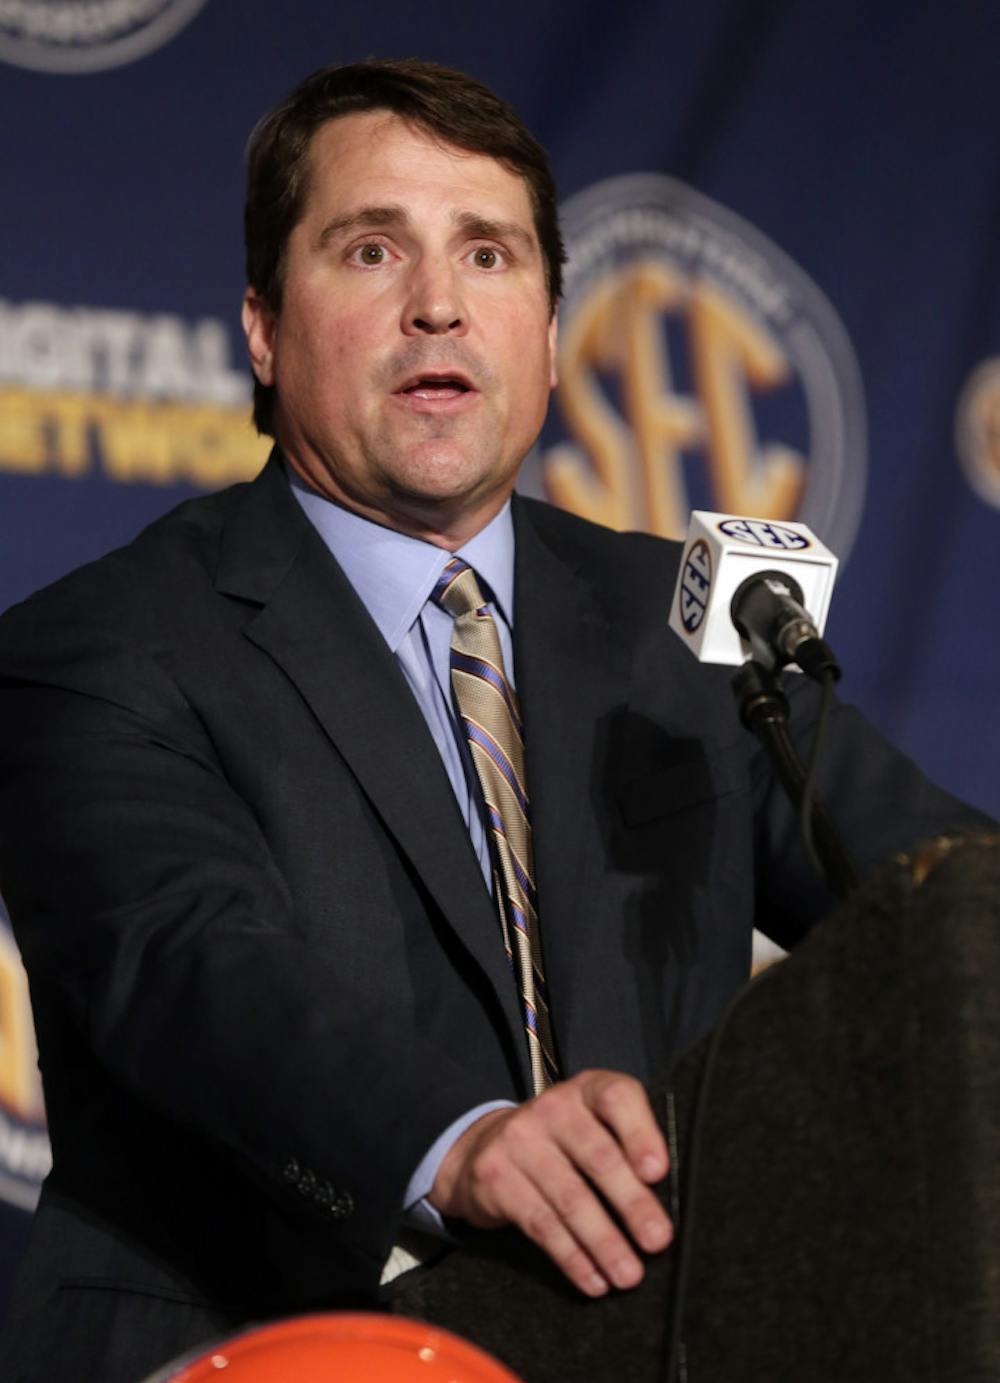 <p>Florida coach Will Muschamp talks with reporters during the Southeastern Conference football Media Days in Hoover, Ala., on July 16, 2013. Muschamp held a football camp over the weekend for potential recruits.</p><p><span> </span></p>